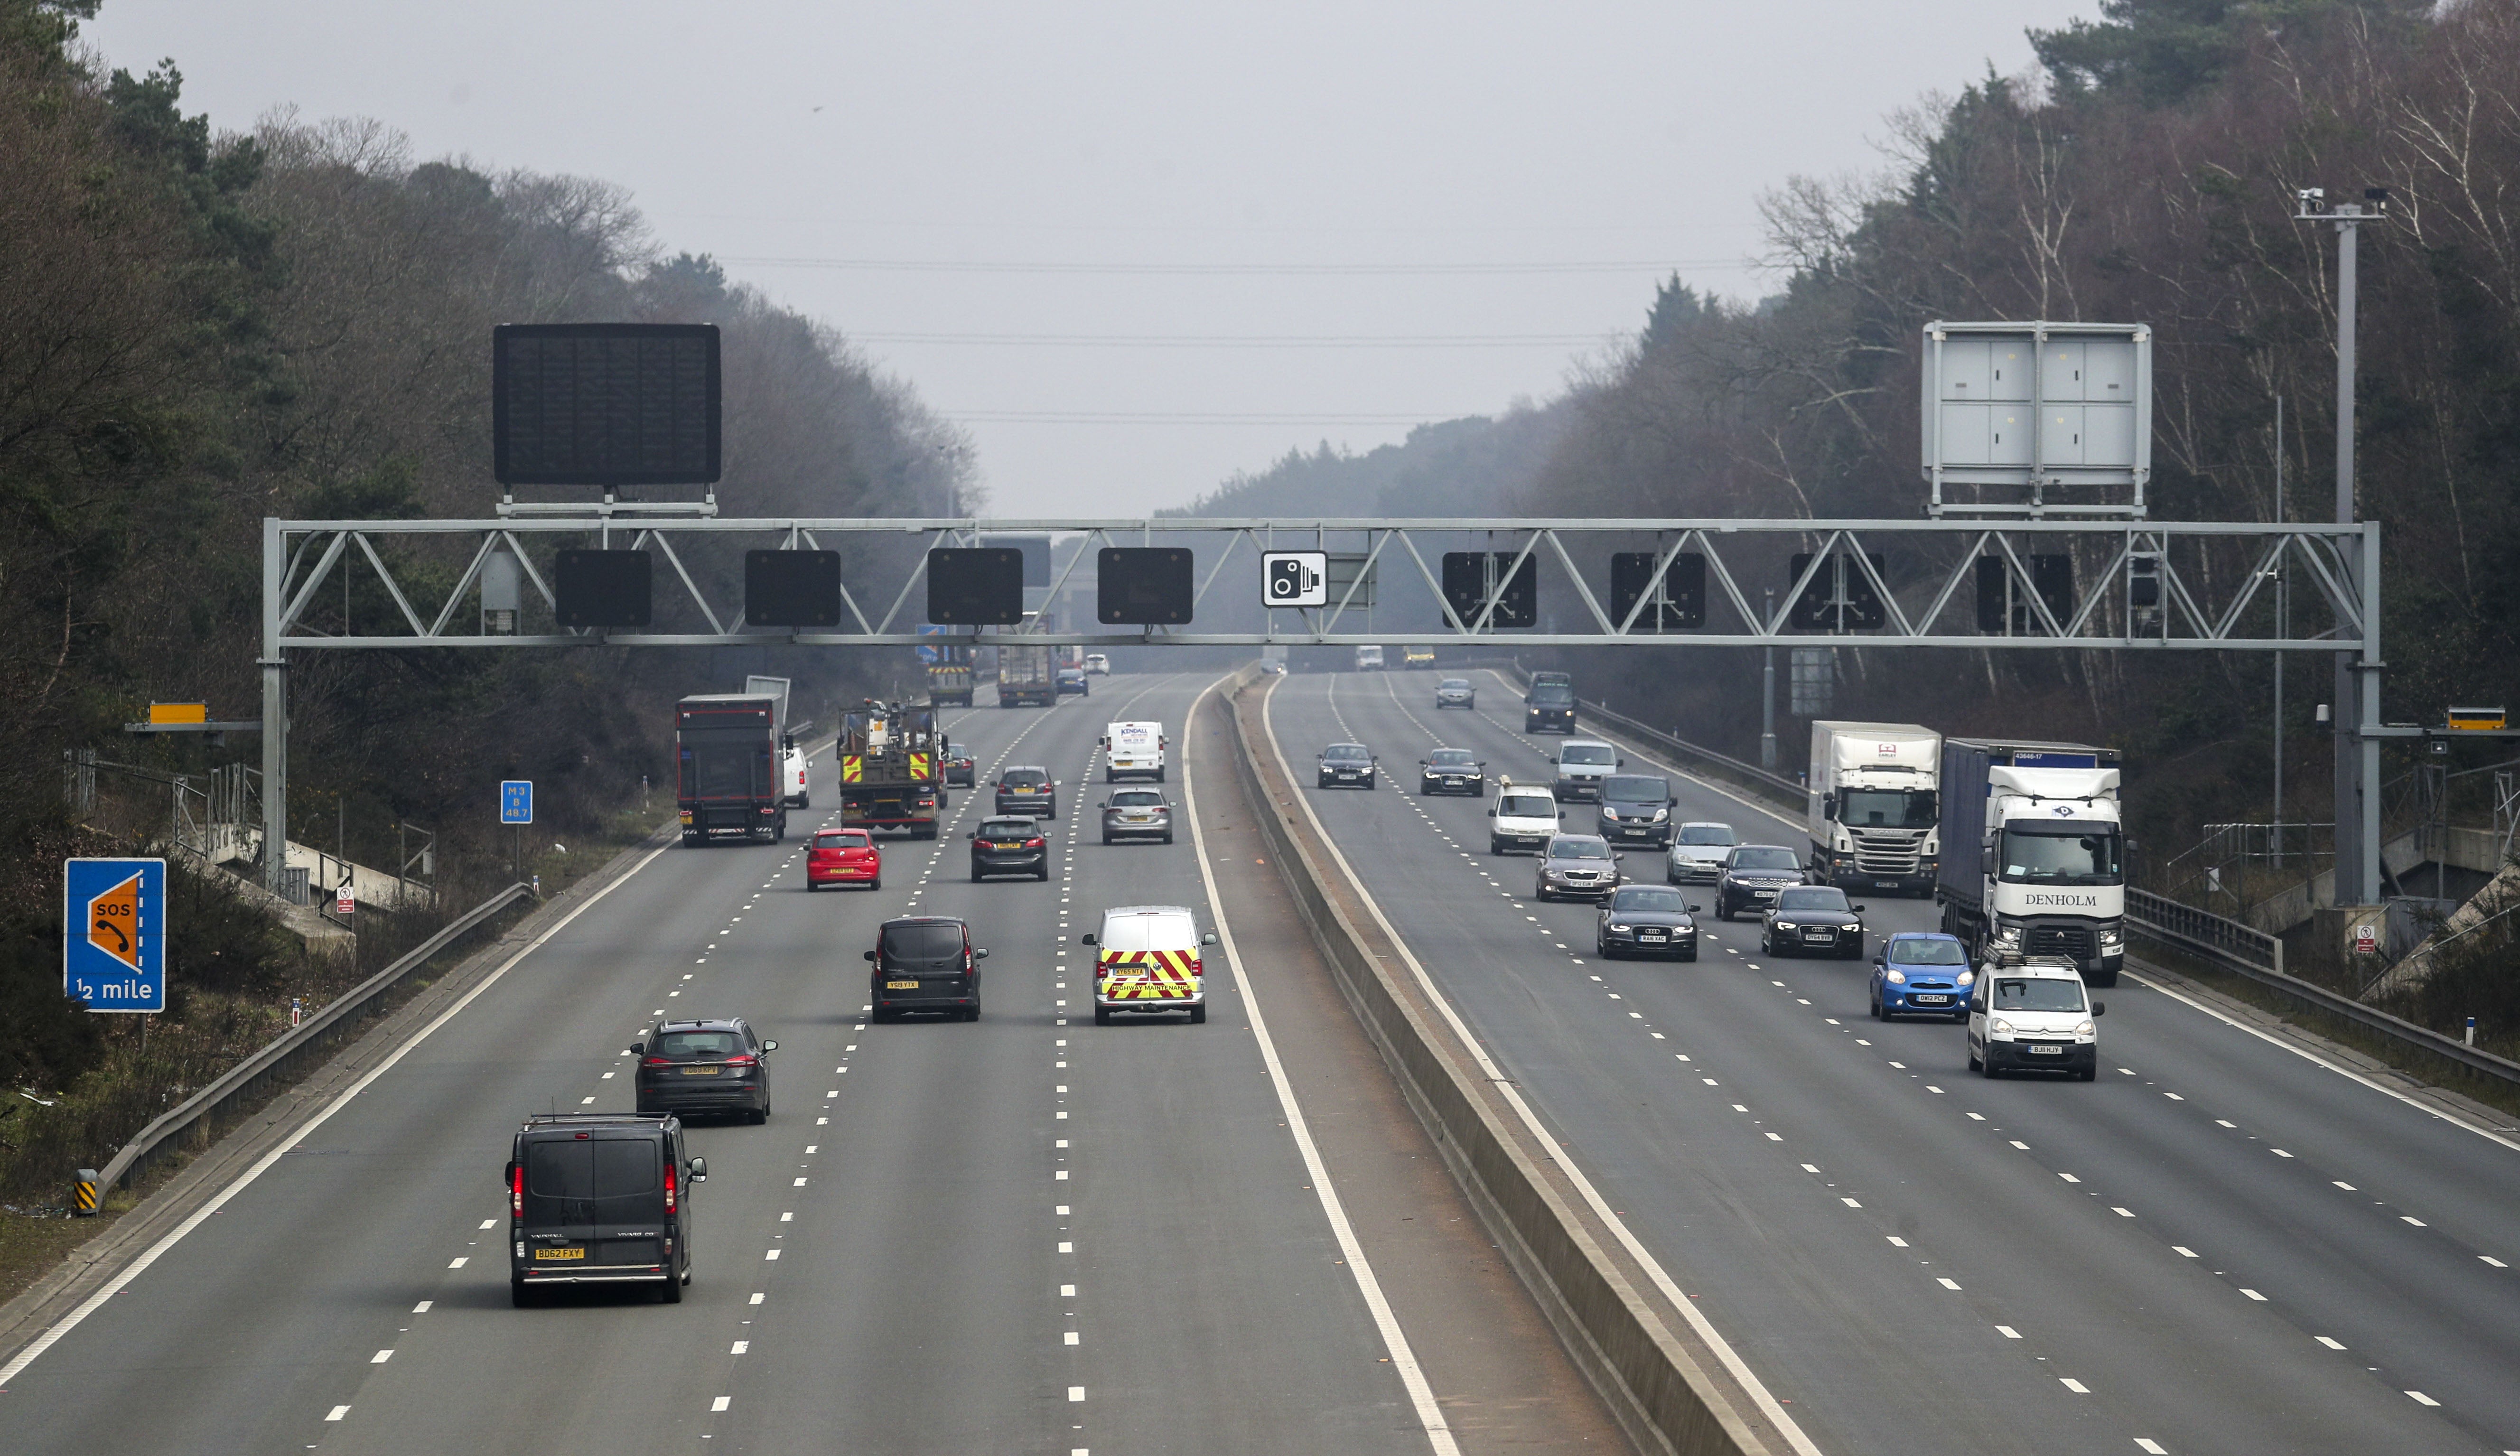 New European Union rules mandating speed-limiting systems to be fitted to new cars, vans and lorries come into force on Wednesday, but are not being implemented in the UK (Steve Parsons/PA)